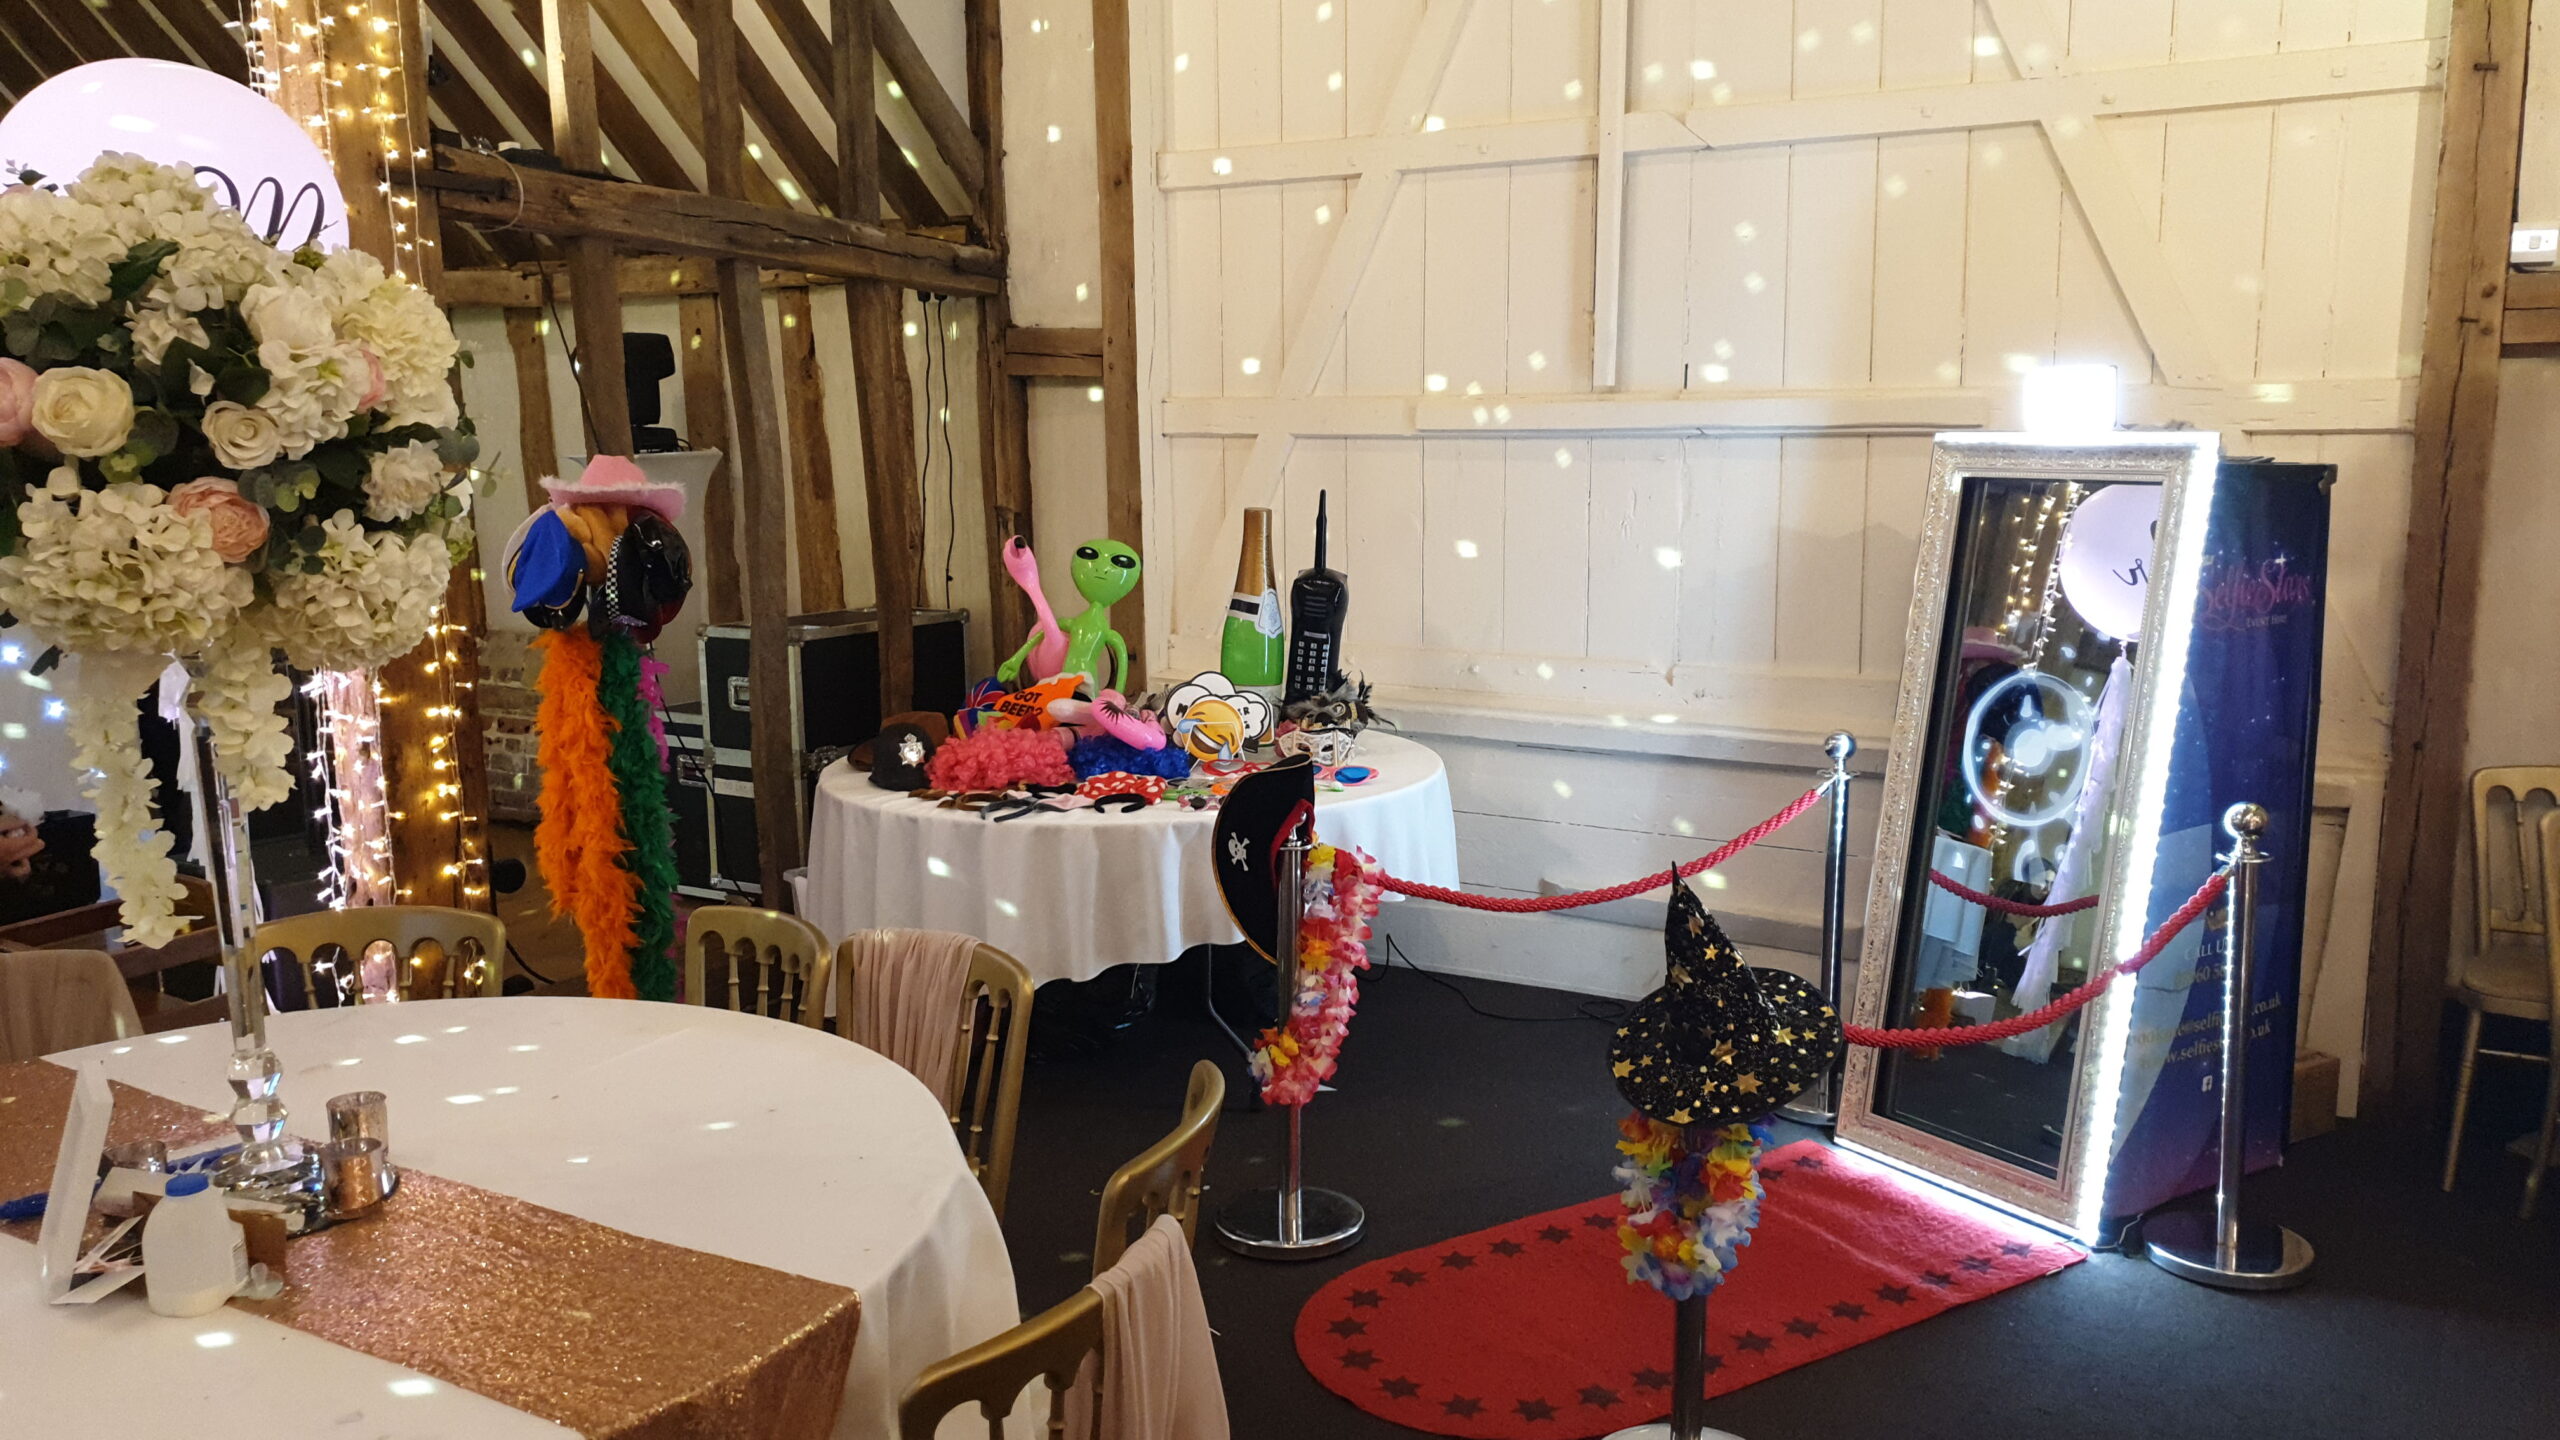 Magic Mirror Photo Booth Party Season Sale! For Bookings between 1st Oct - 31st December and get 20% Off! Contact us today on 01279 721 030 / 01279 721 030